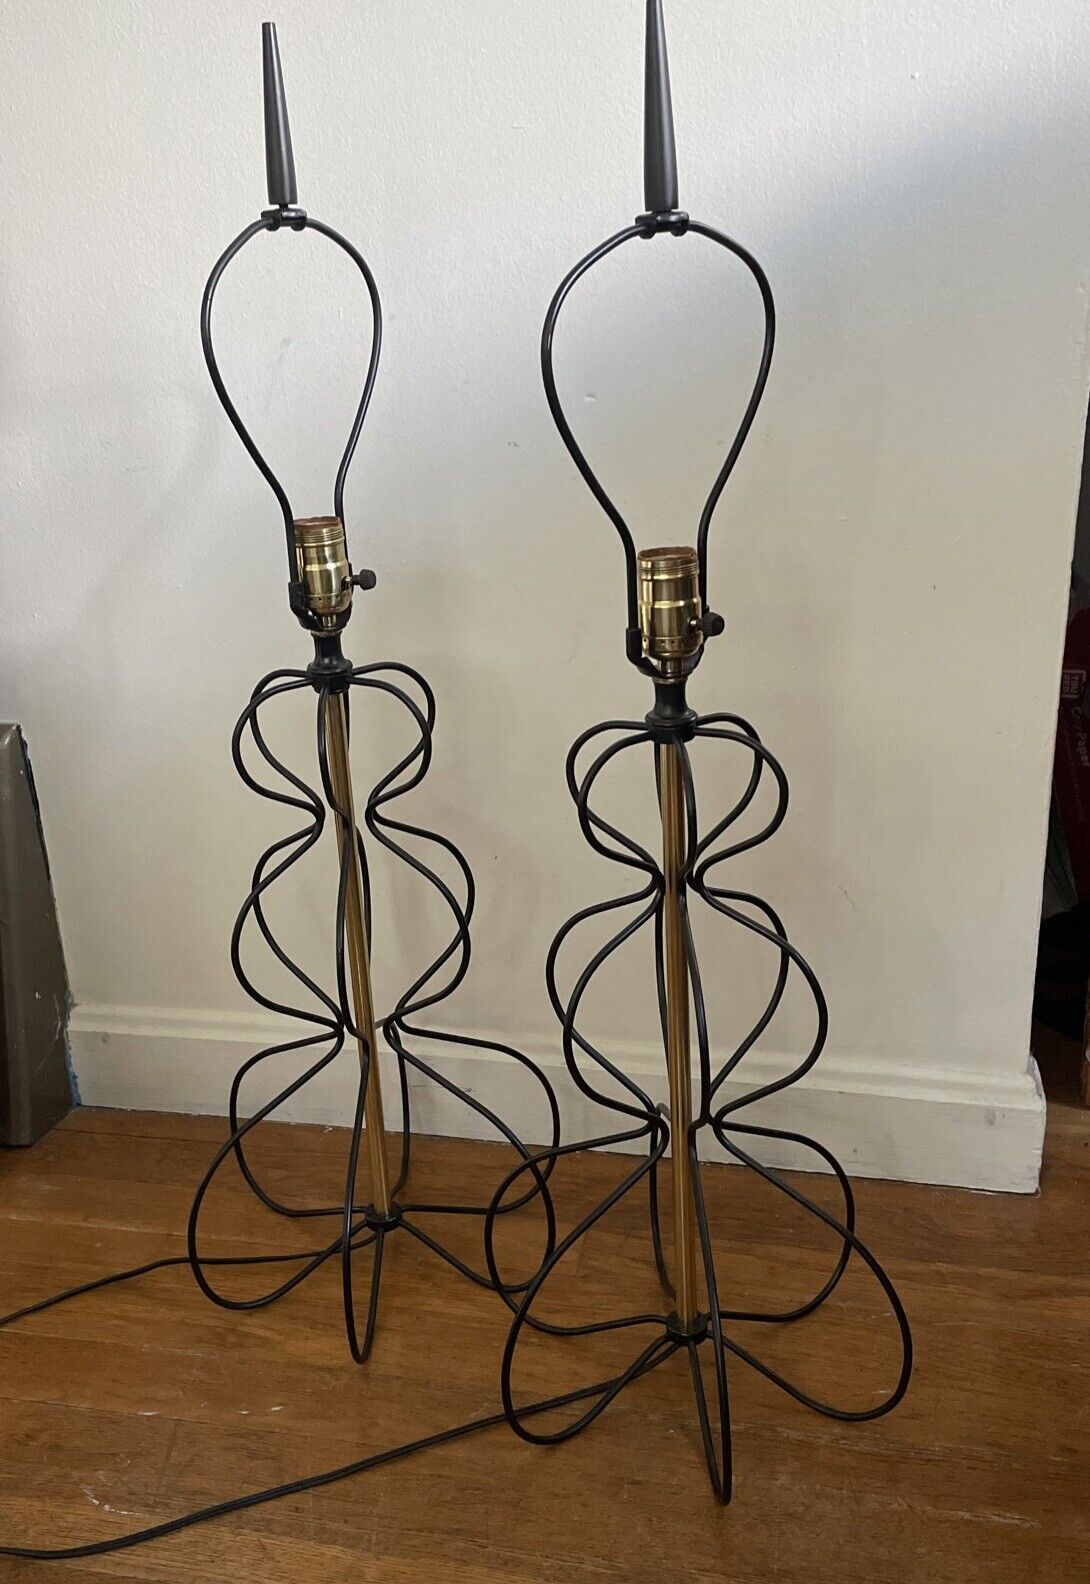 Vintage 50s Atomic Curvy Wire Lamps Pair Mid Century Modern